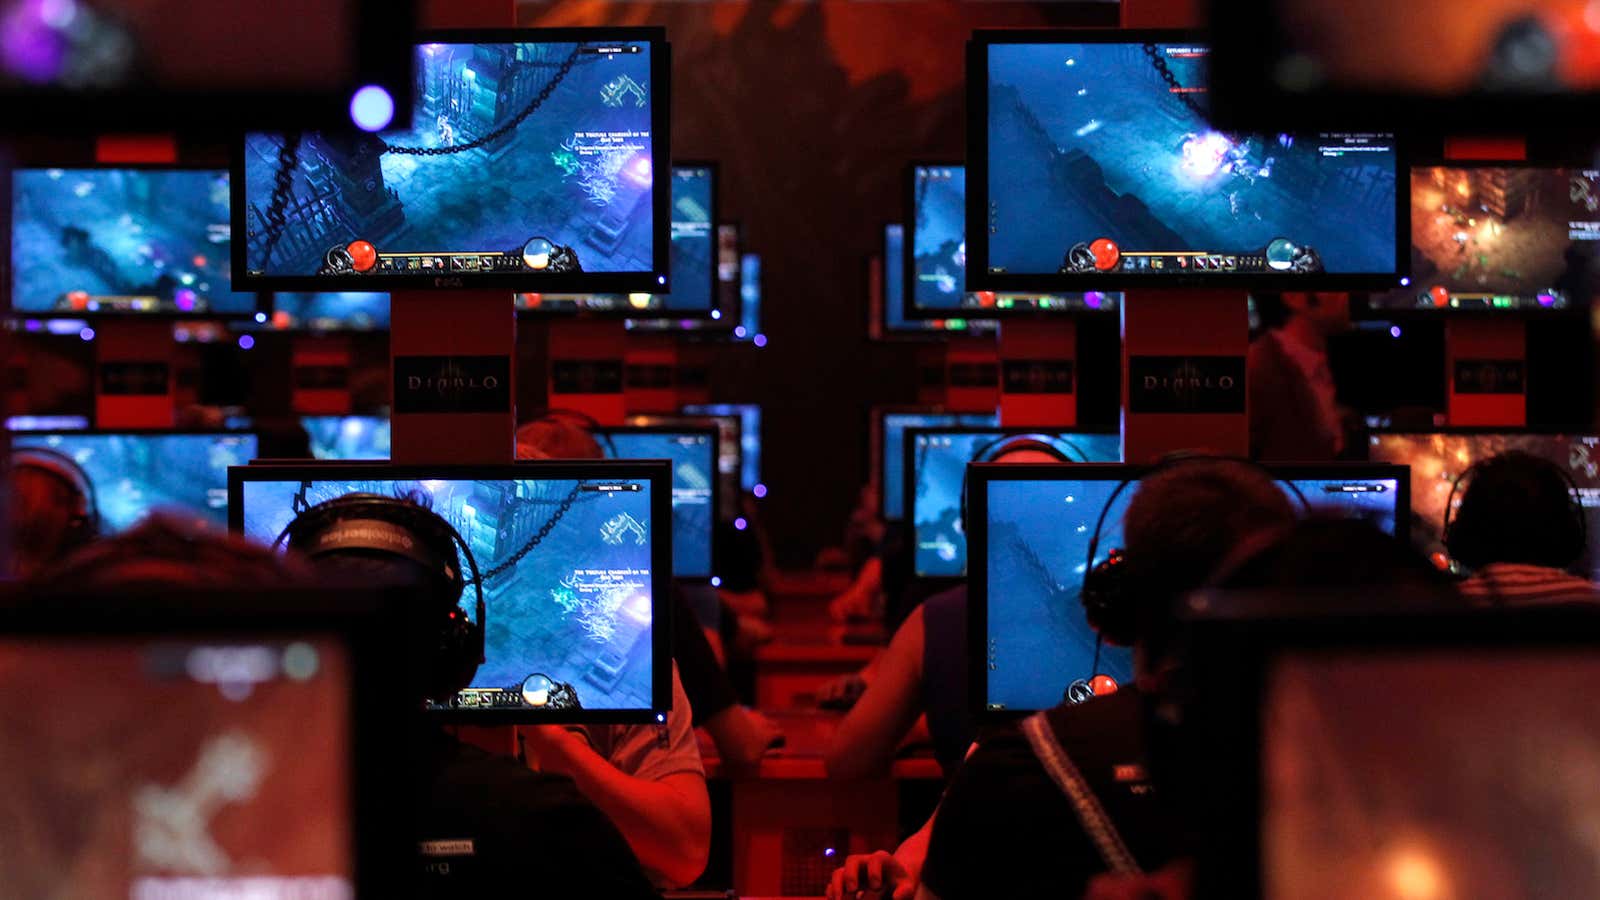 Businesses can adopt common gaming tactics to help boost revenue.